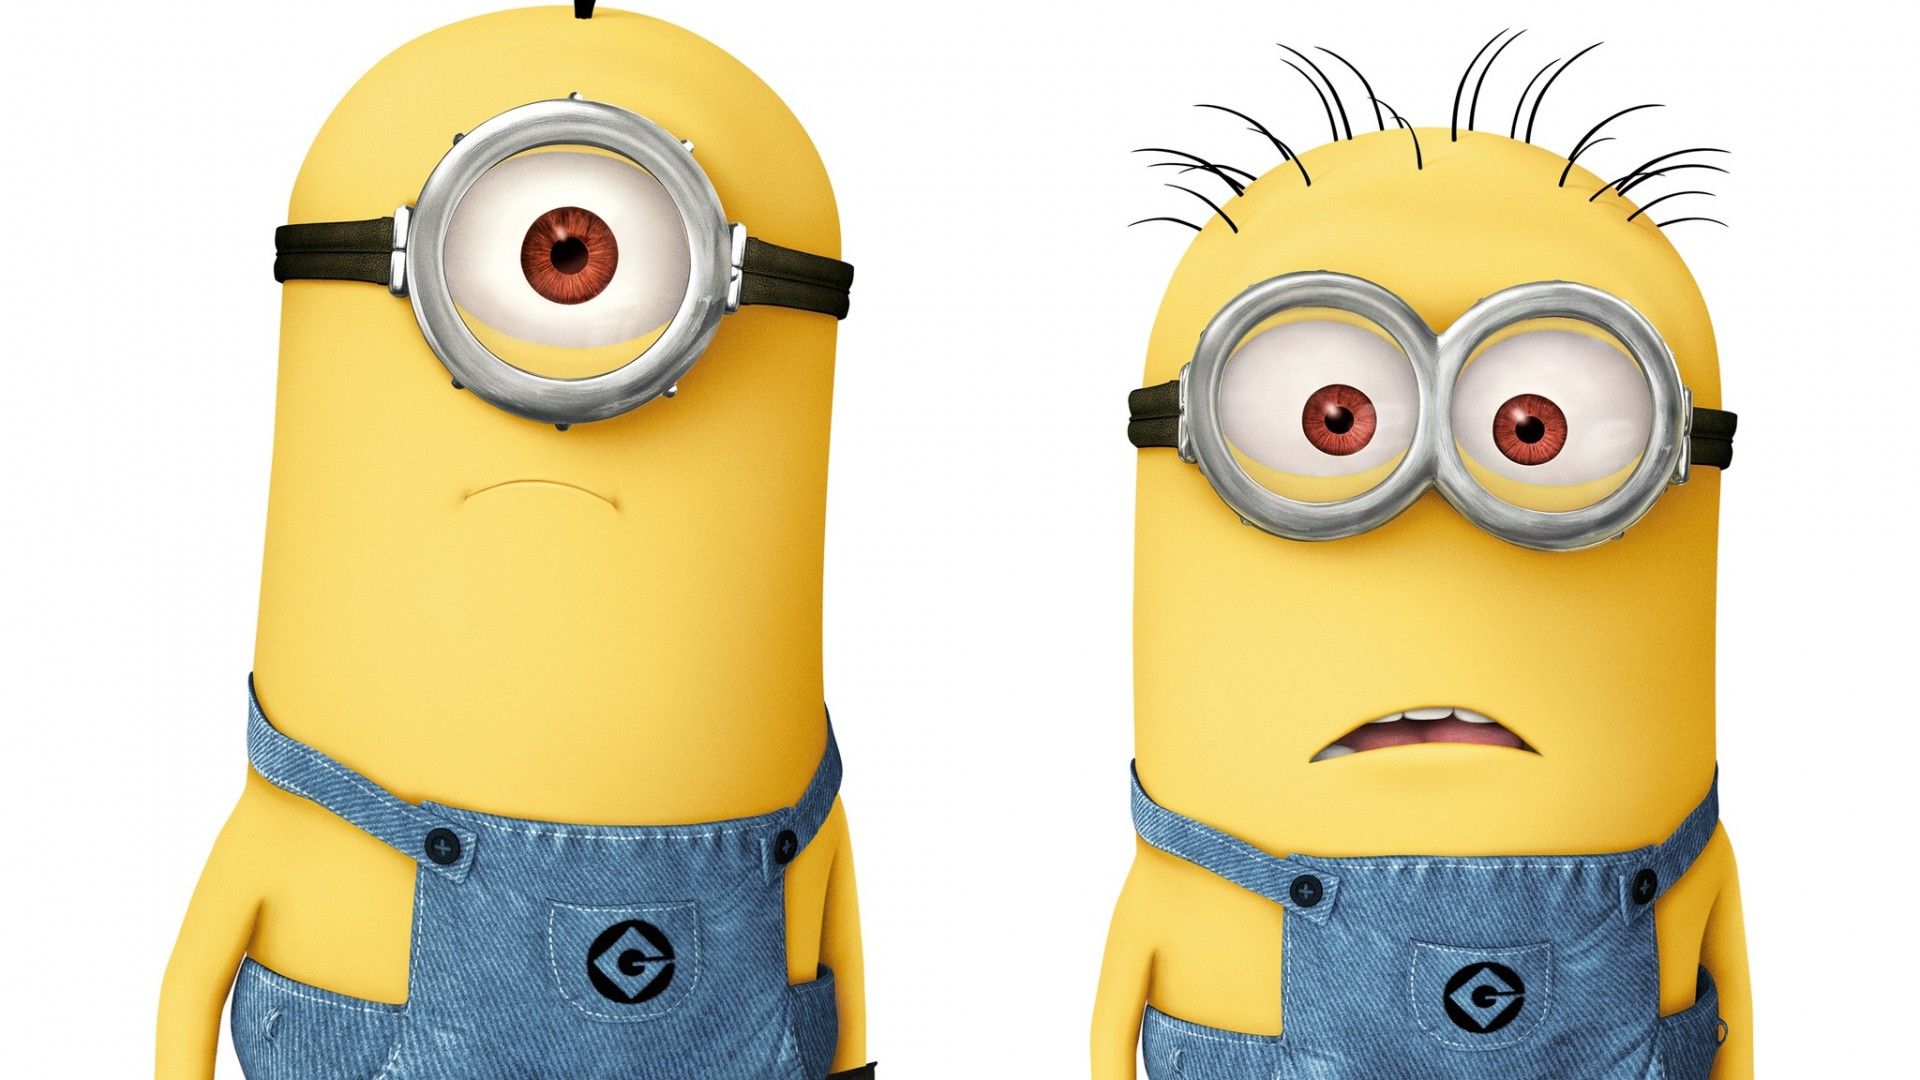 Minions Despicable Me Wallpapers.